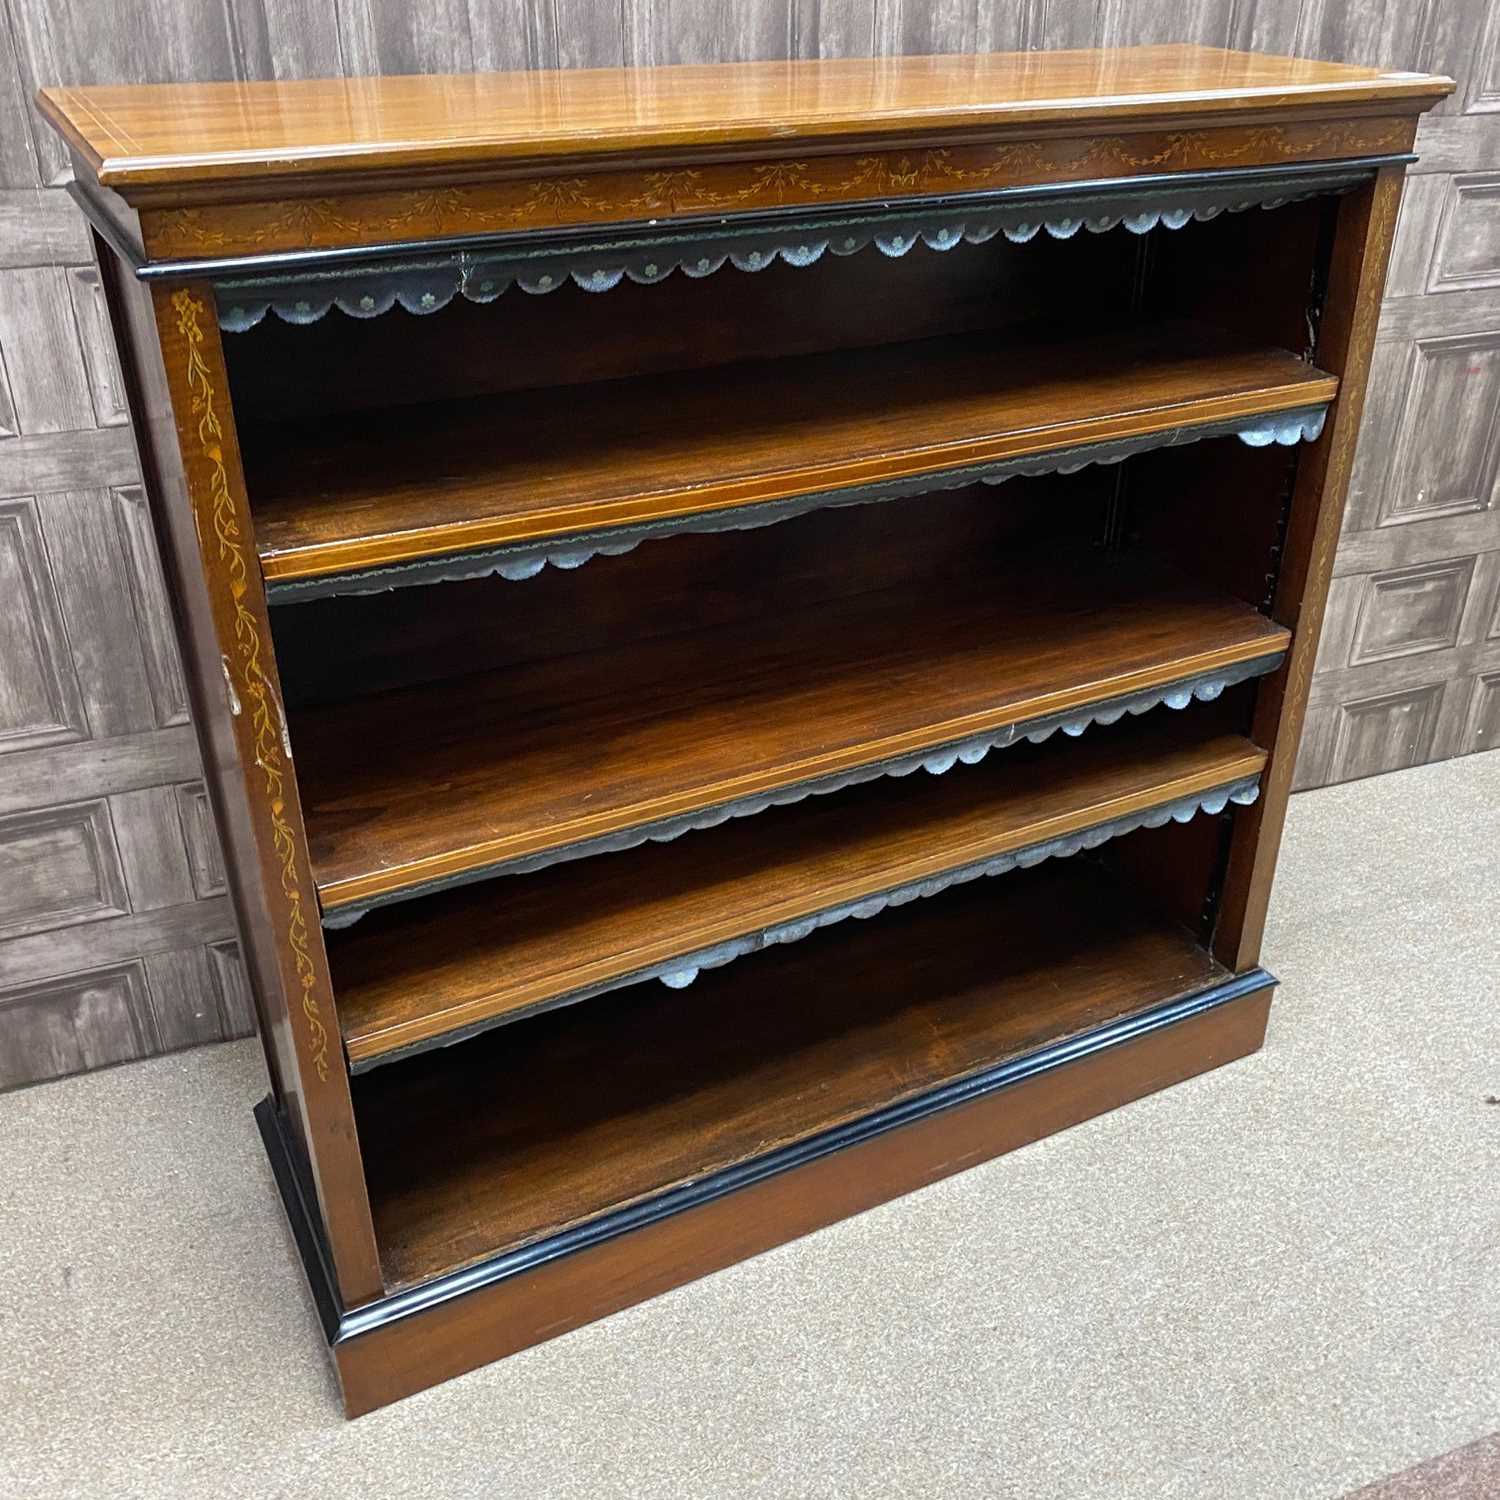 Lot 1322 - A LATE VICTORIAN MAHOGANY AND EBONISED OPEN BOOKCASE